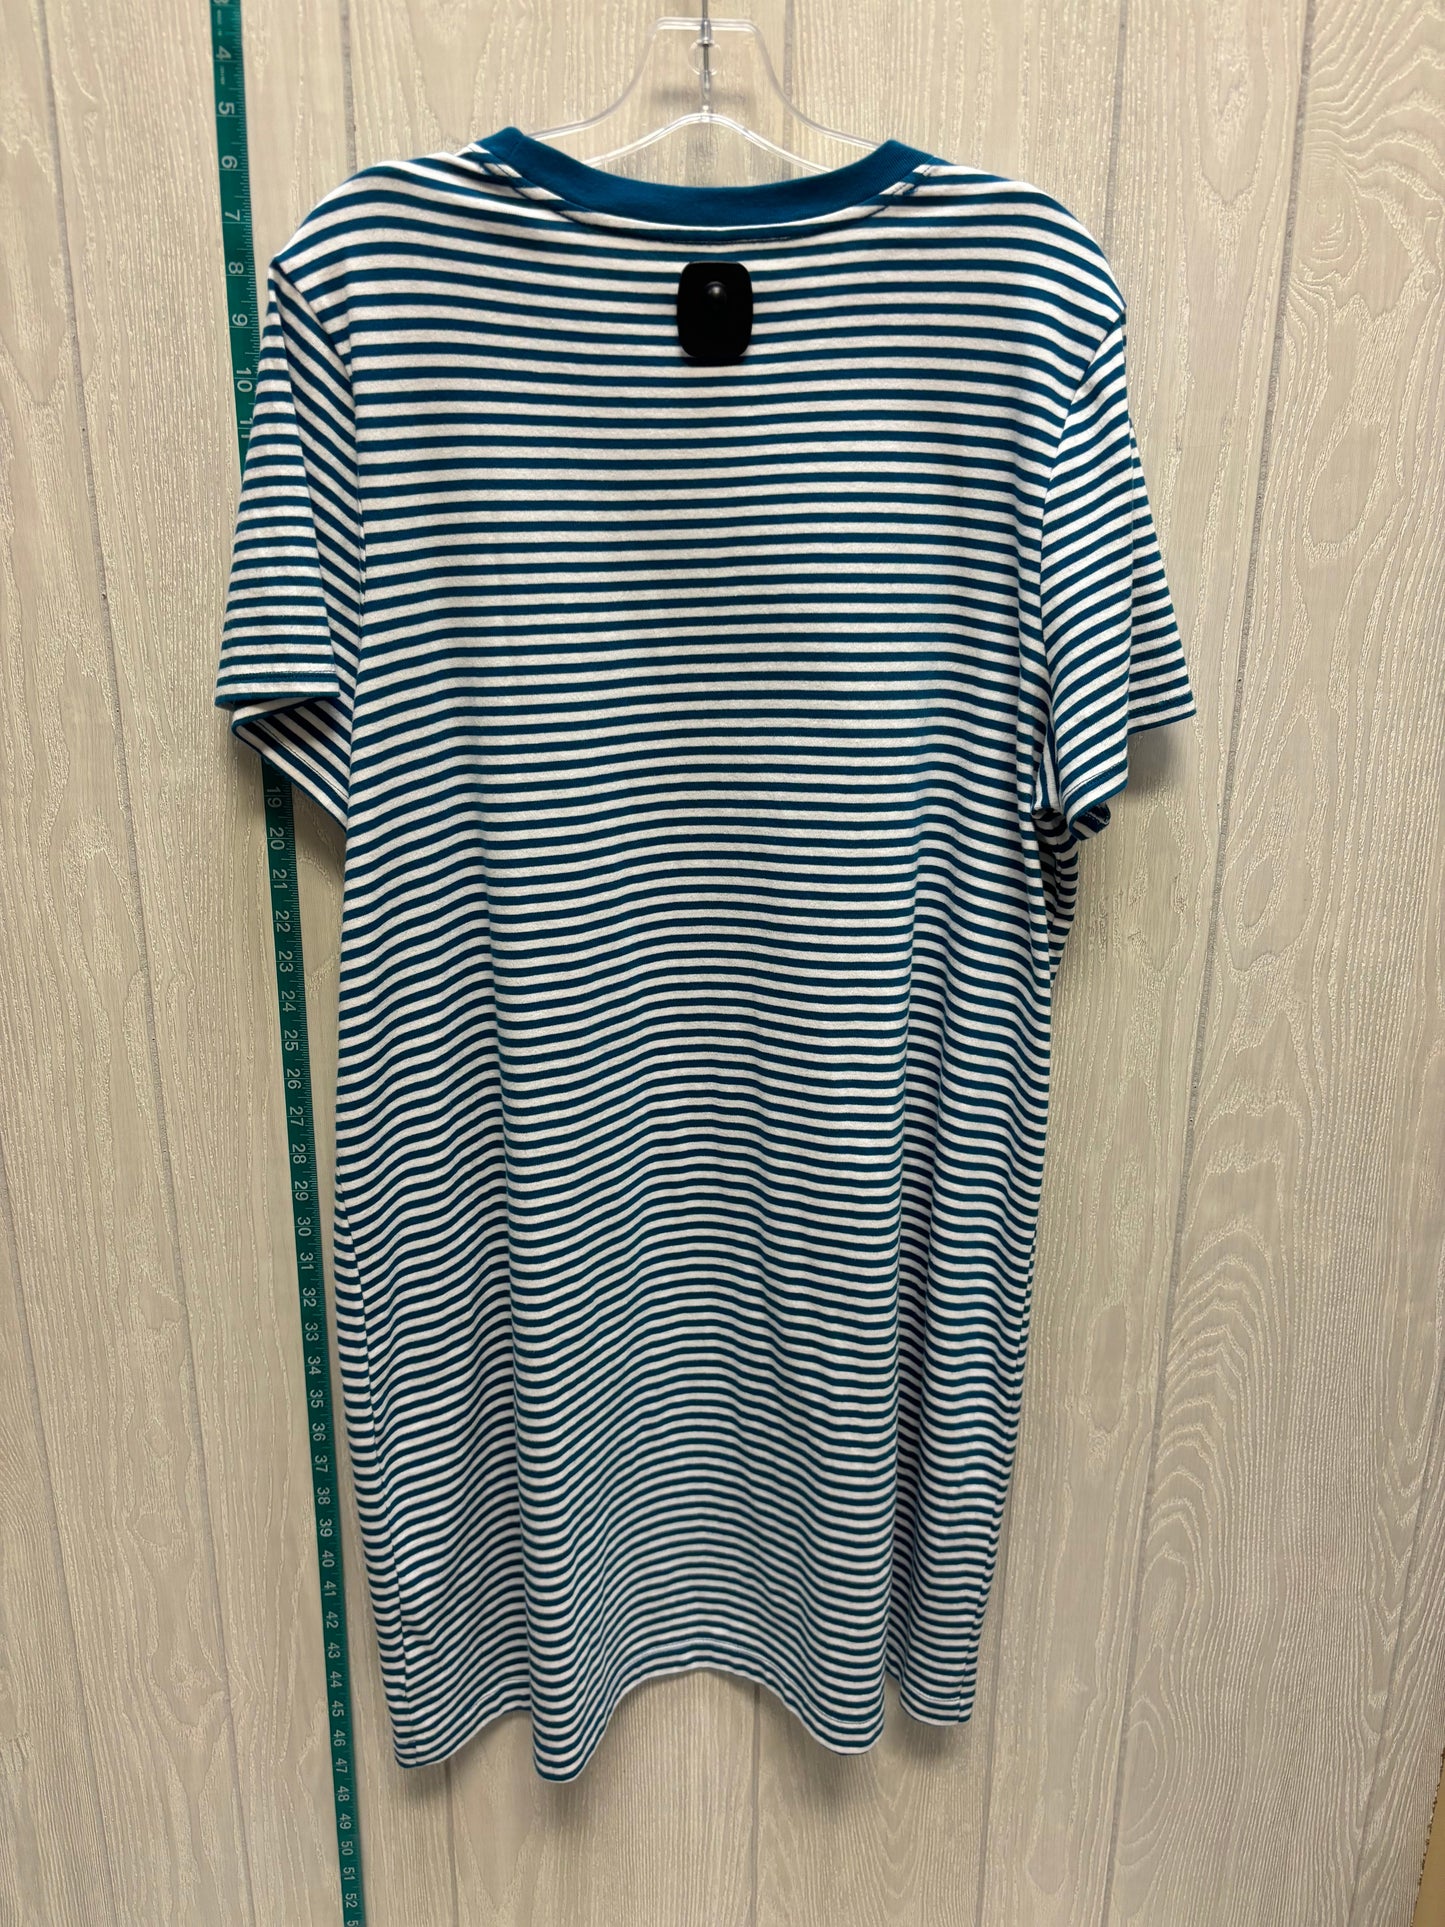 Striped Pattern Dress Casual Short Time And Tru, Size 1x